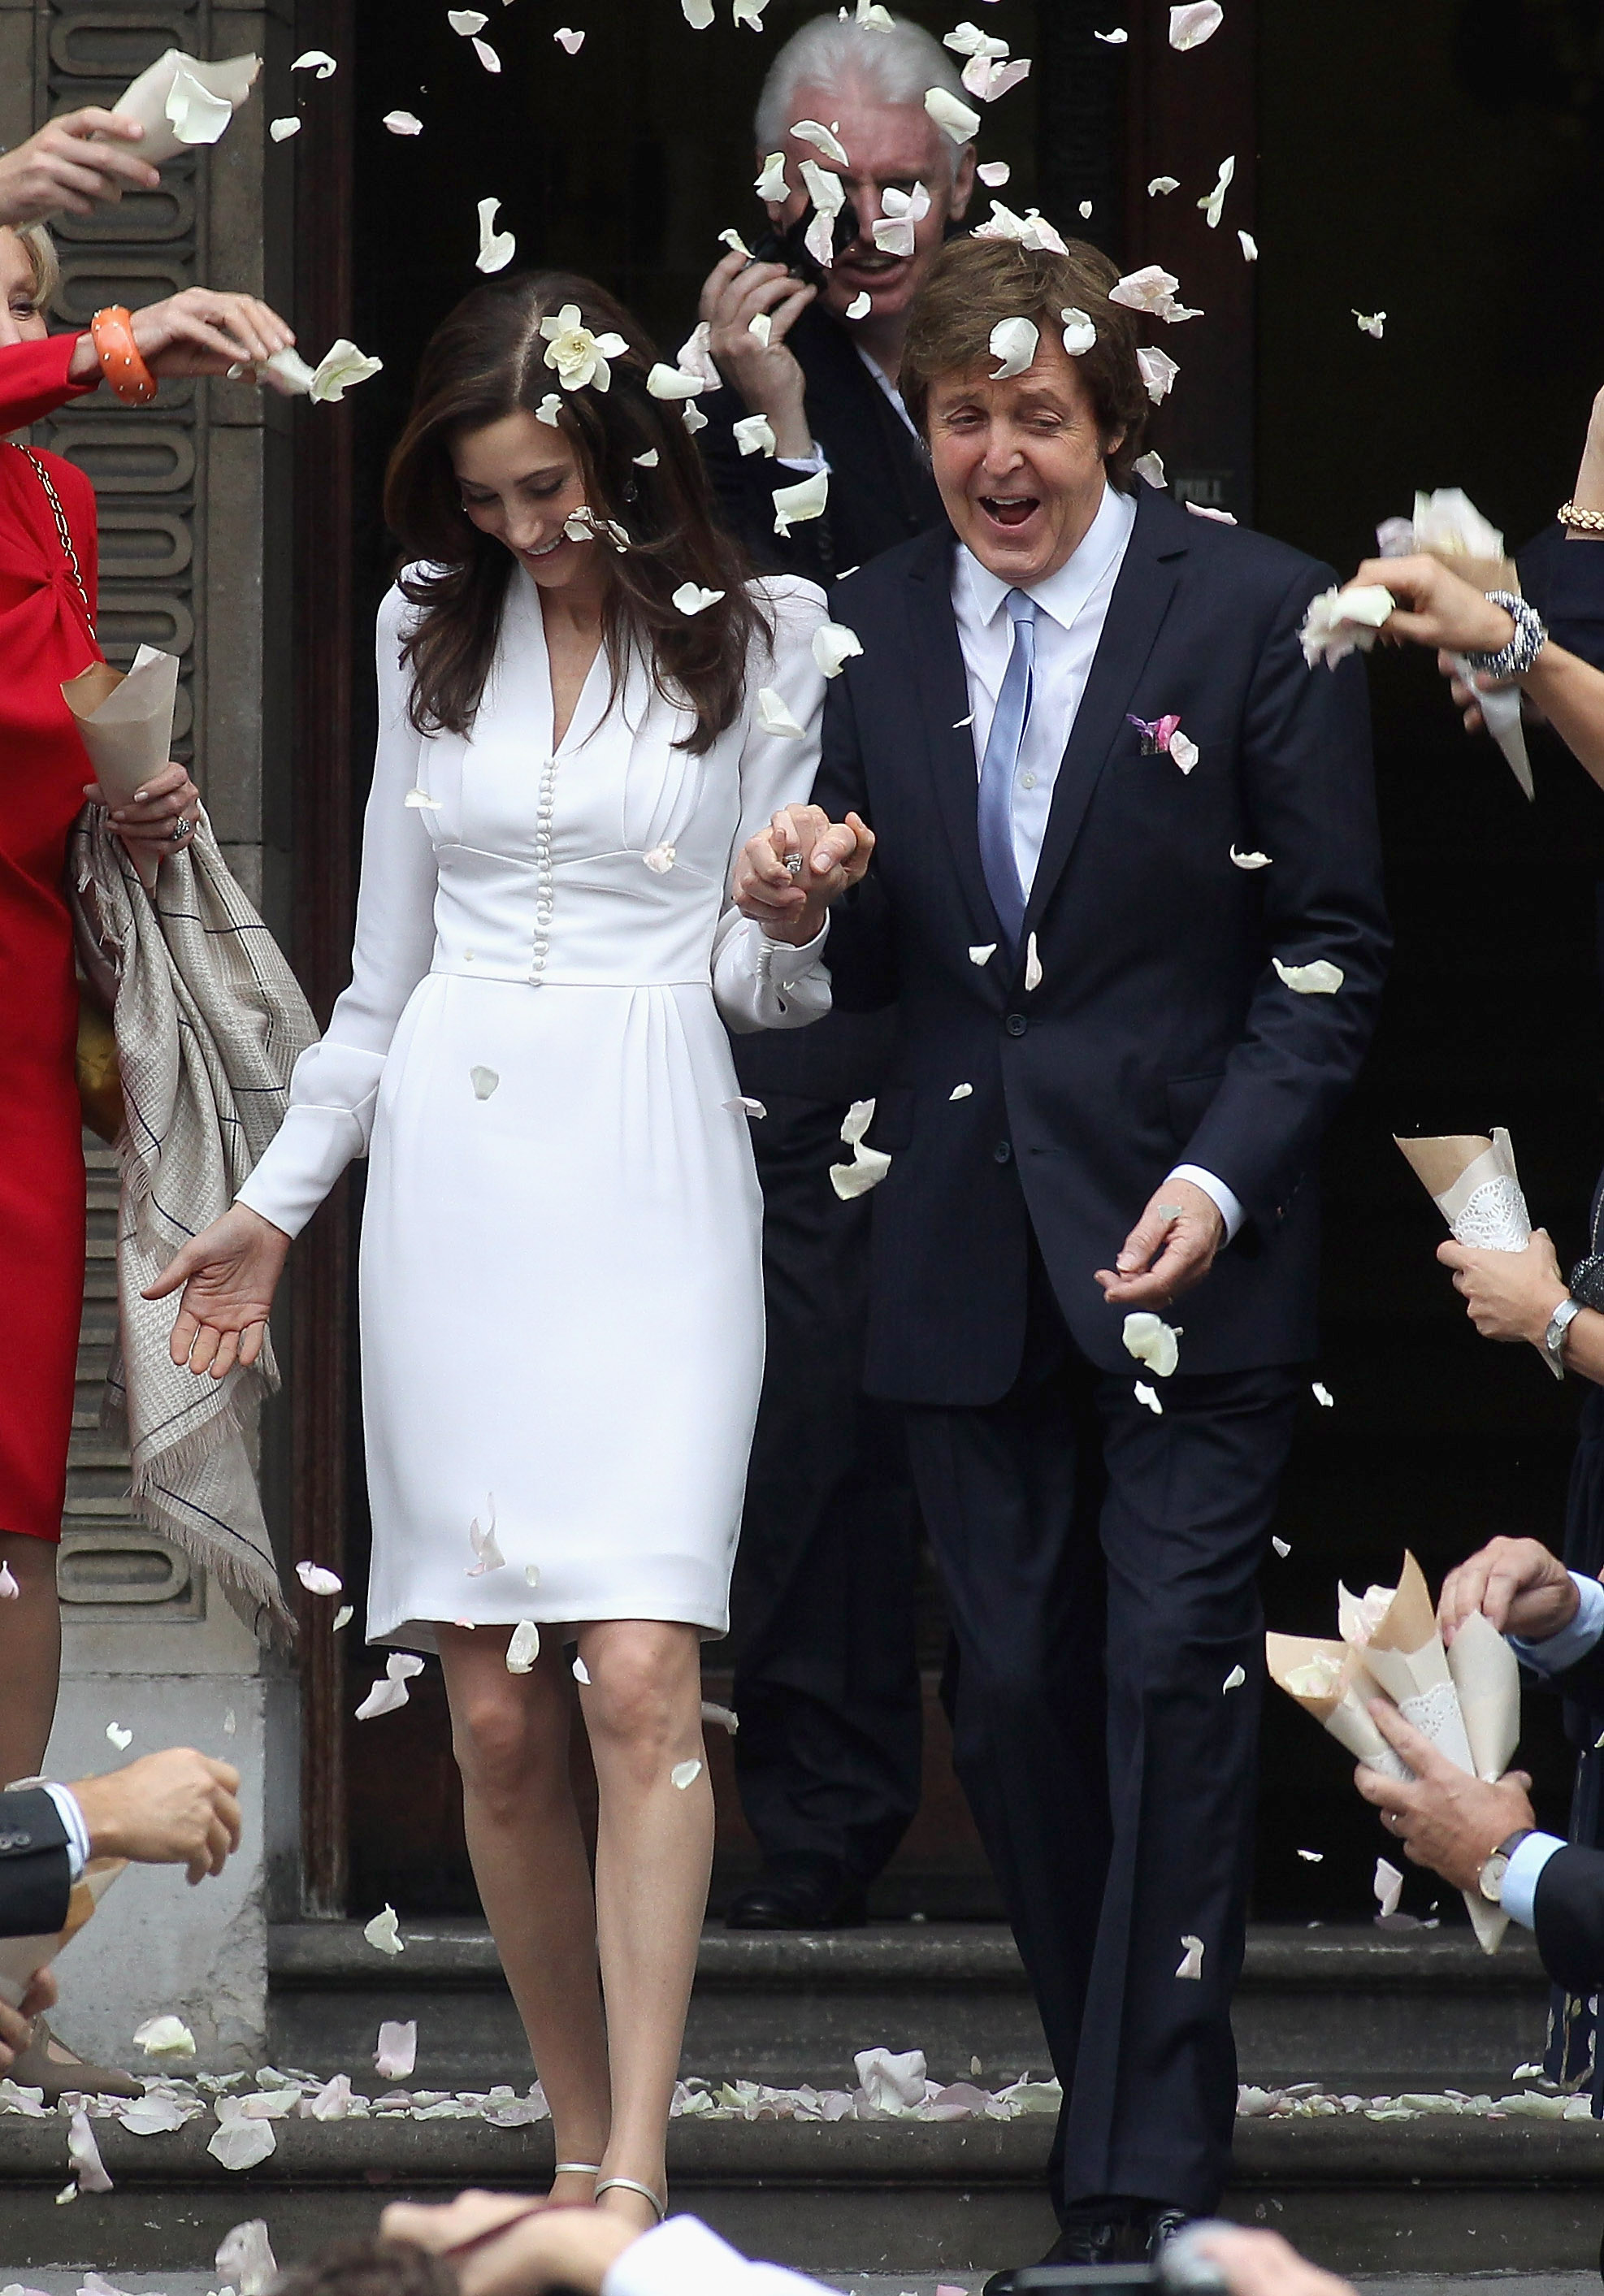 Paul McCartney and Nancy Shevell after their wedding on October 9, 2011 in London, England | Source: Getty Images